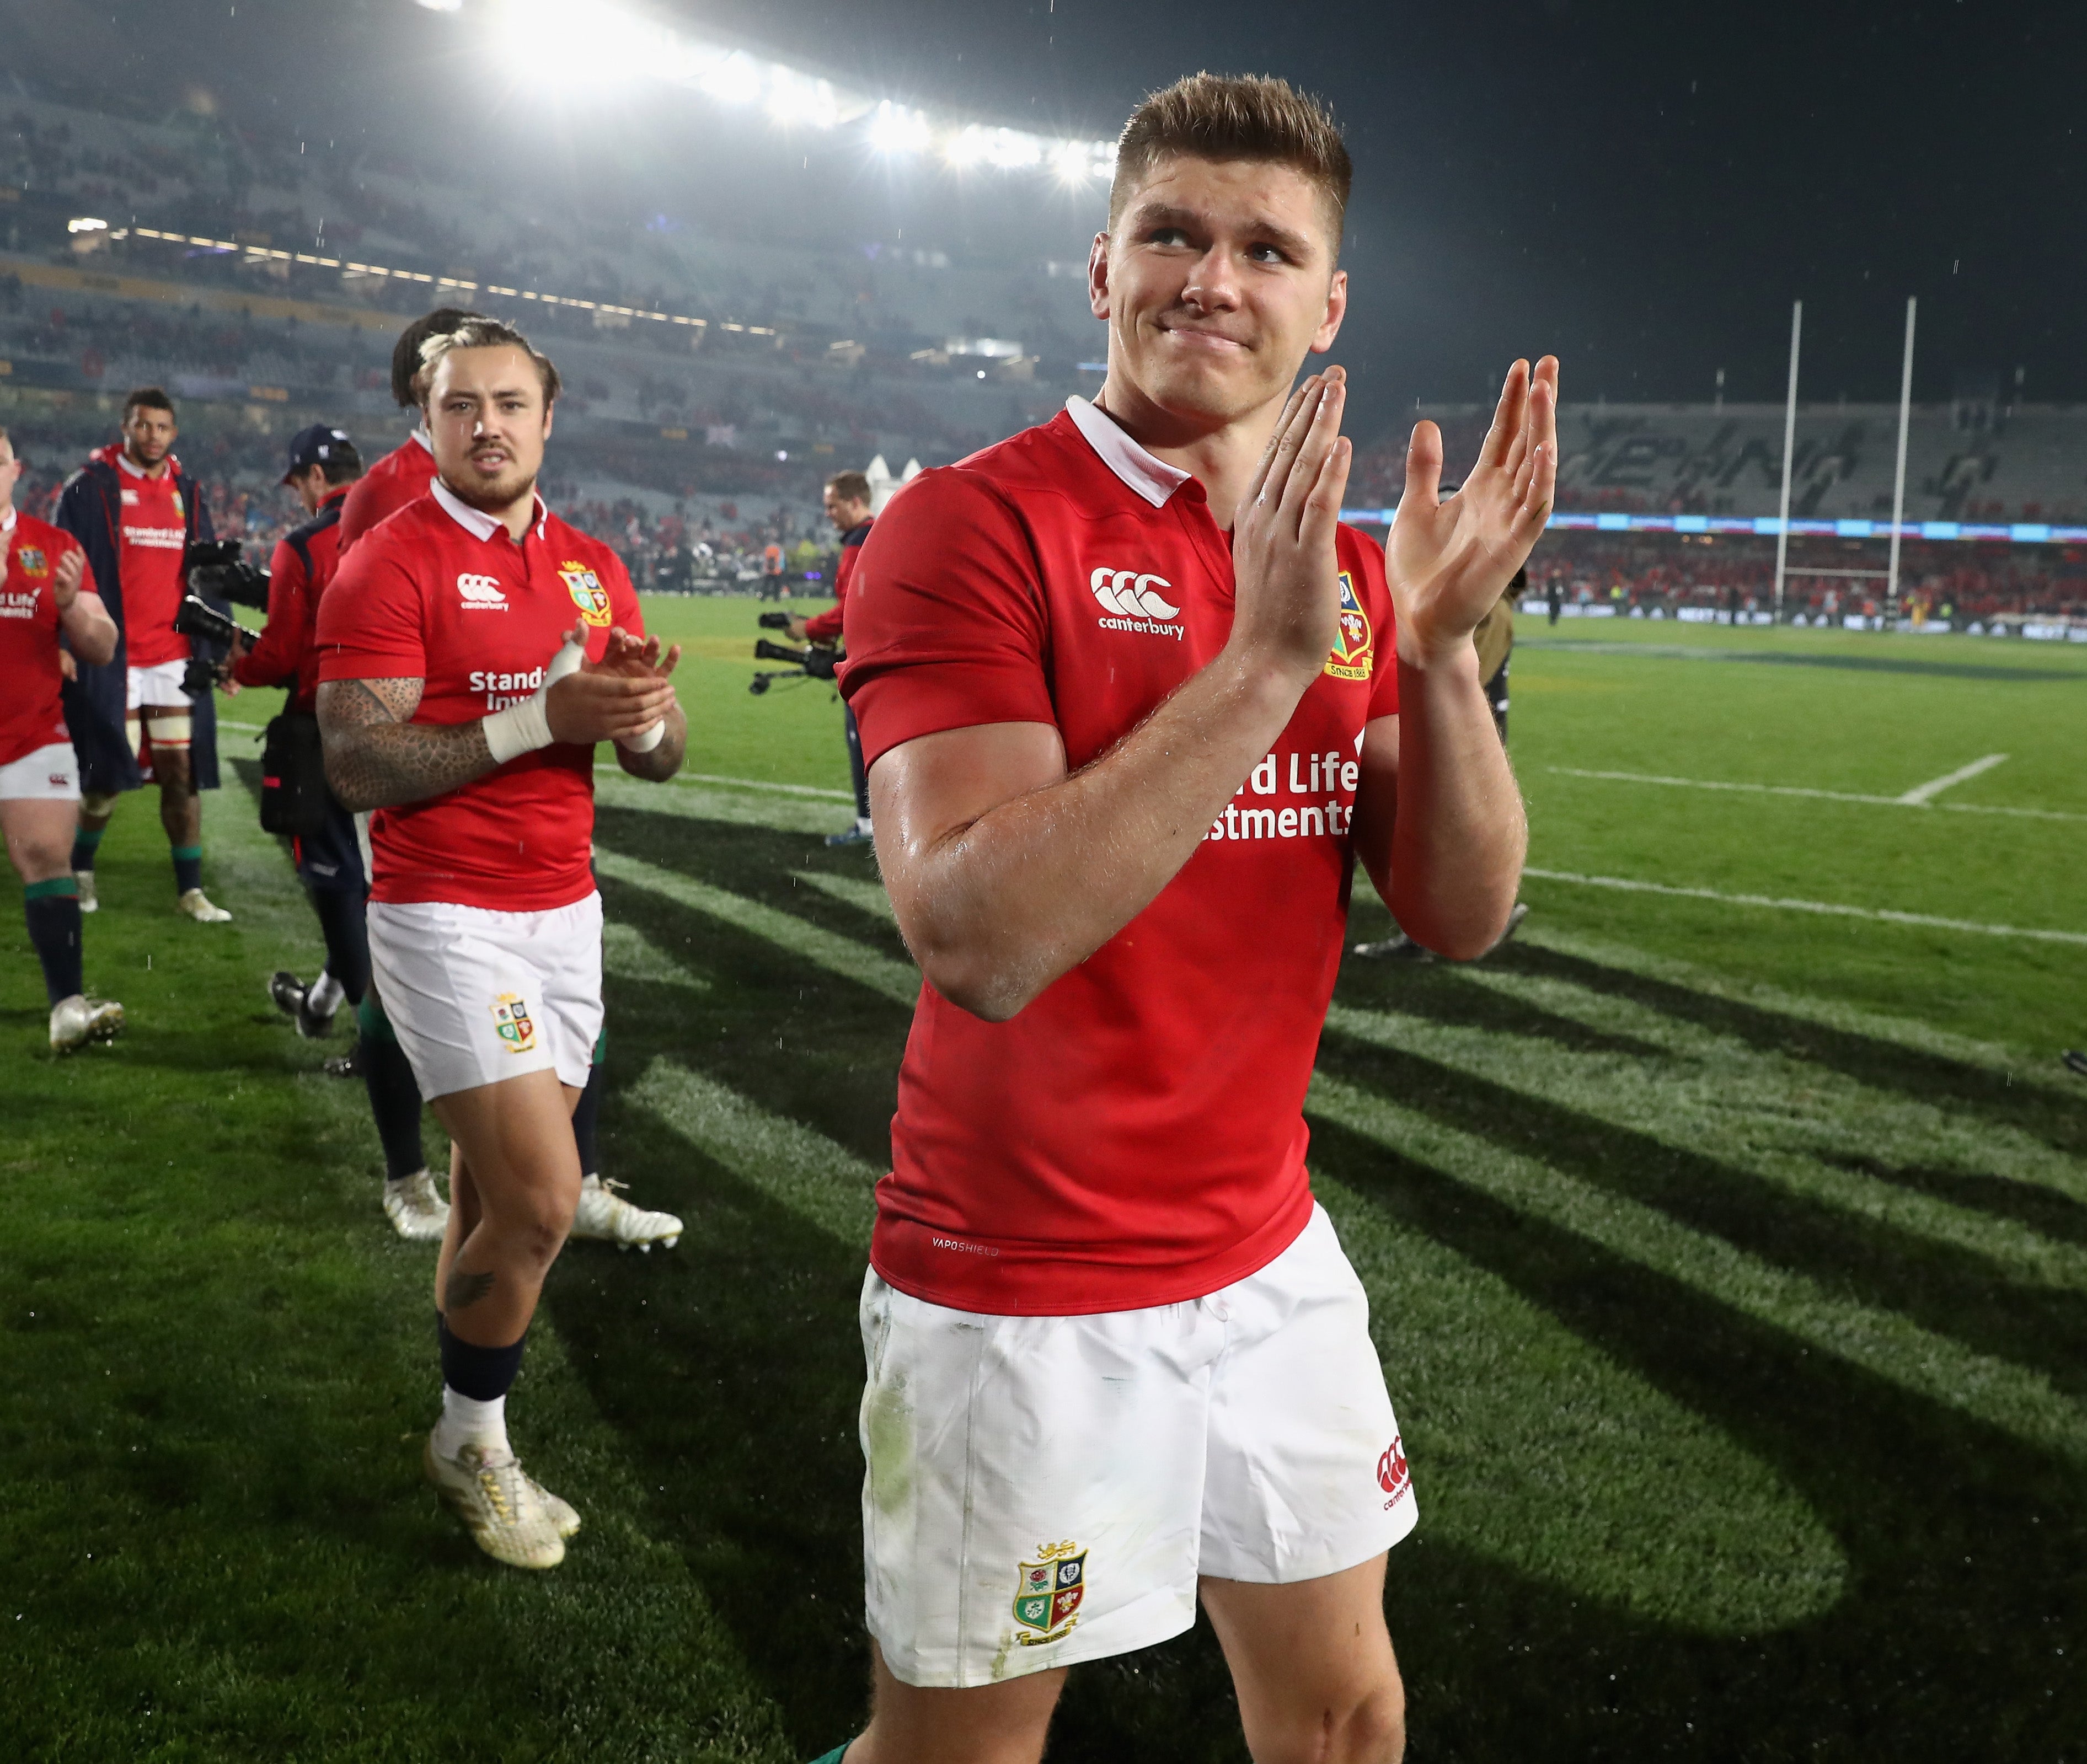 Who will Warren Gatland select for his British and Irish Lions squad next summer?